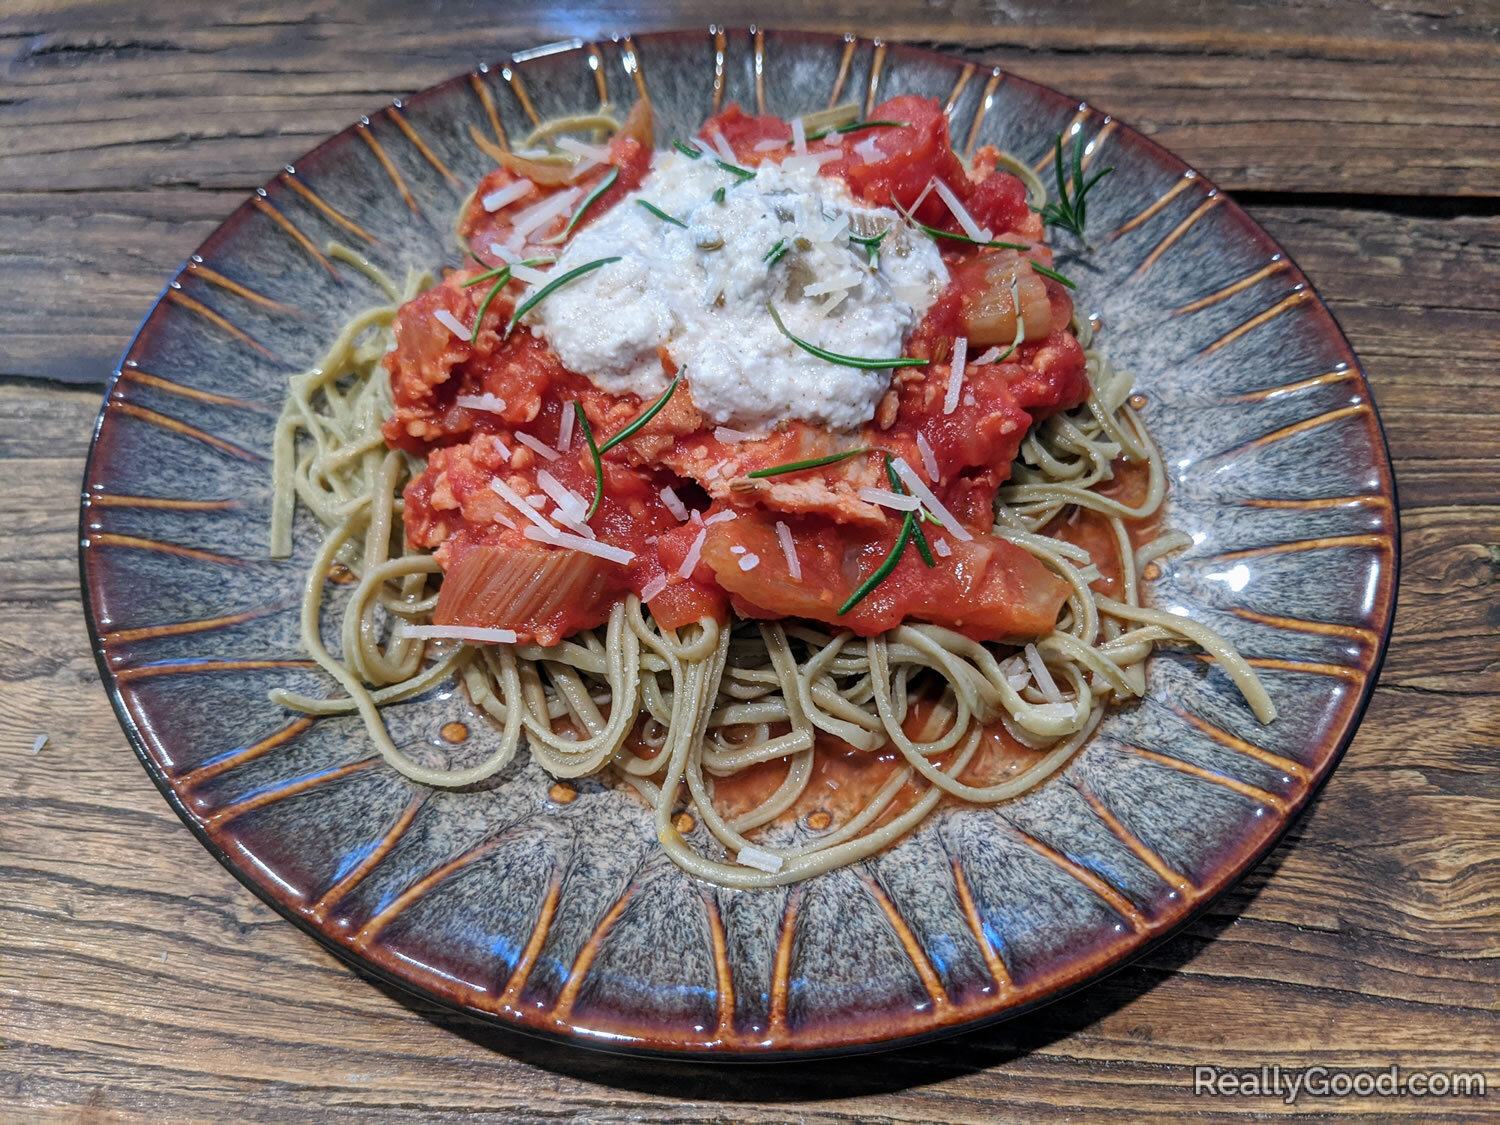 Edamame noodles, tomato sauce, vegetables, and ricotta cheese